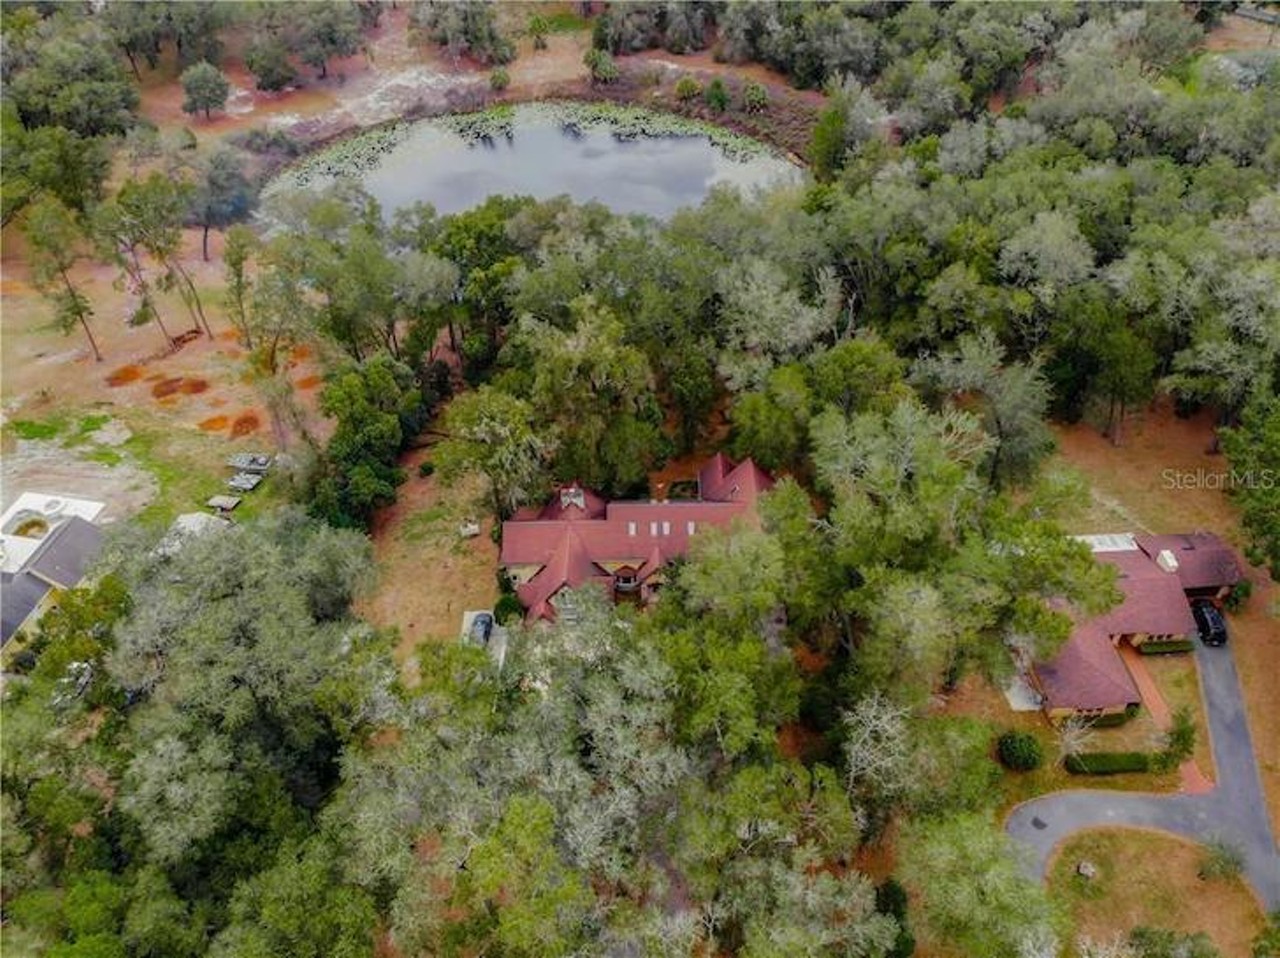 Rick Silanskas once tried to take on Disney World, now his crumbling fairy tale Florida home is for sale